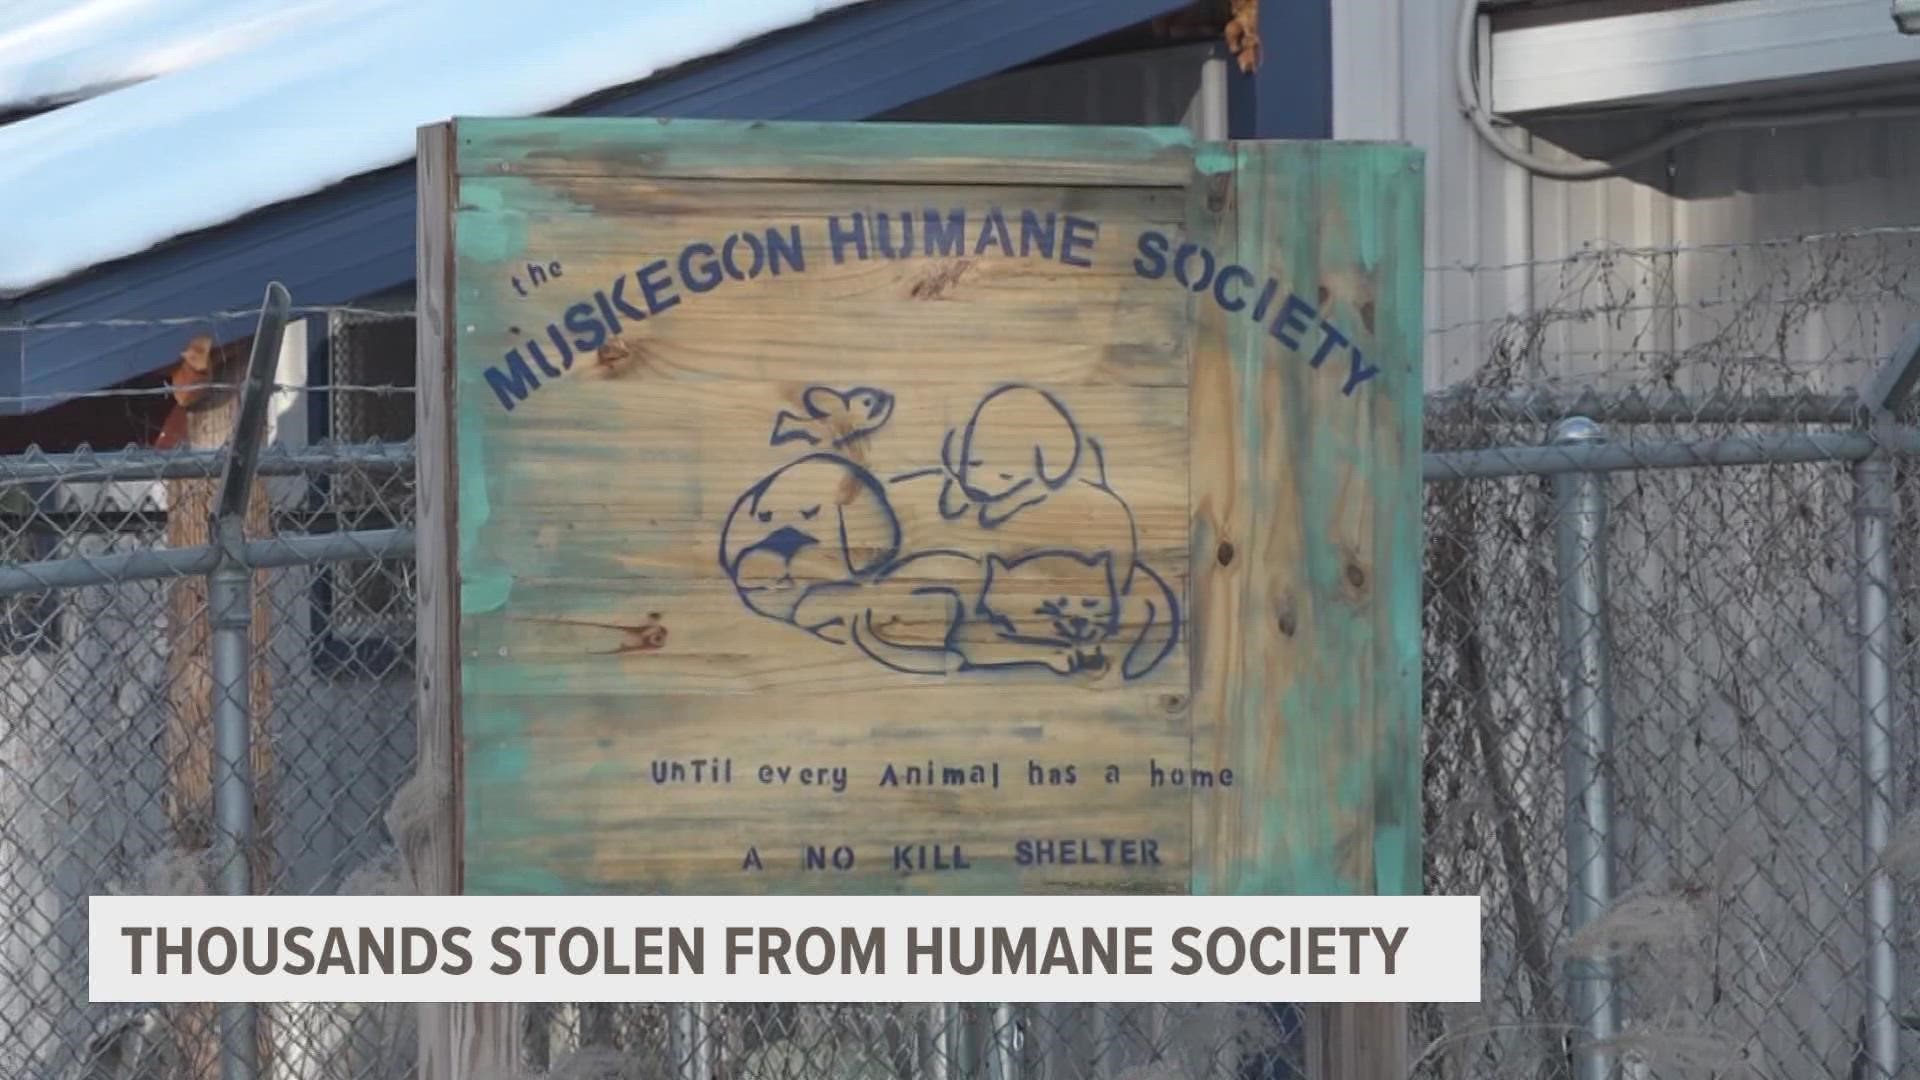 A West Michigan humane society is in need of help after thousands of dollars were stolen from the shelter last week, during one of its busiest times of the year.